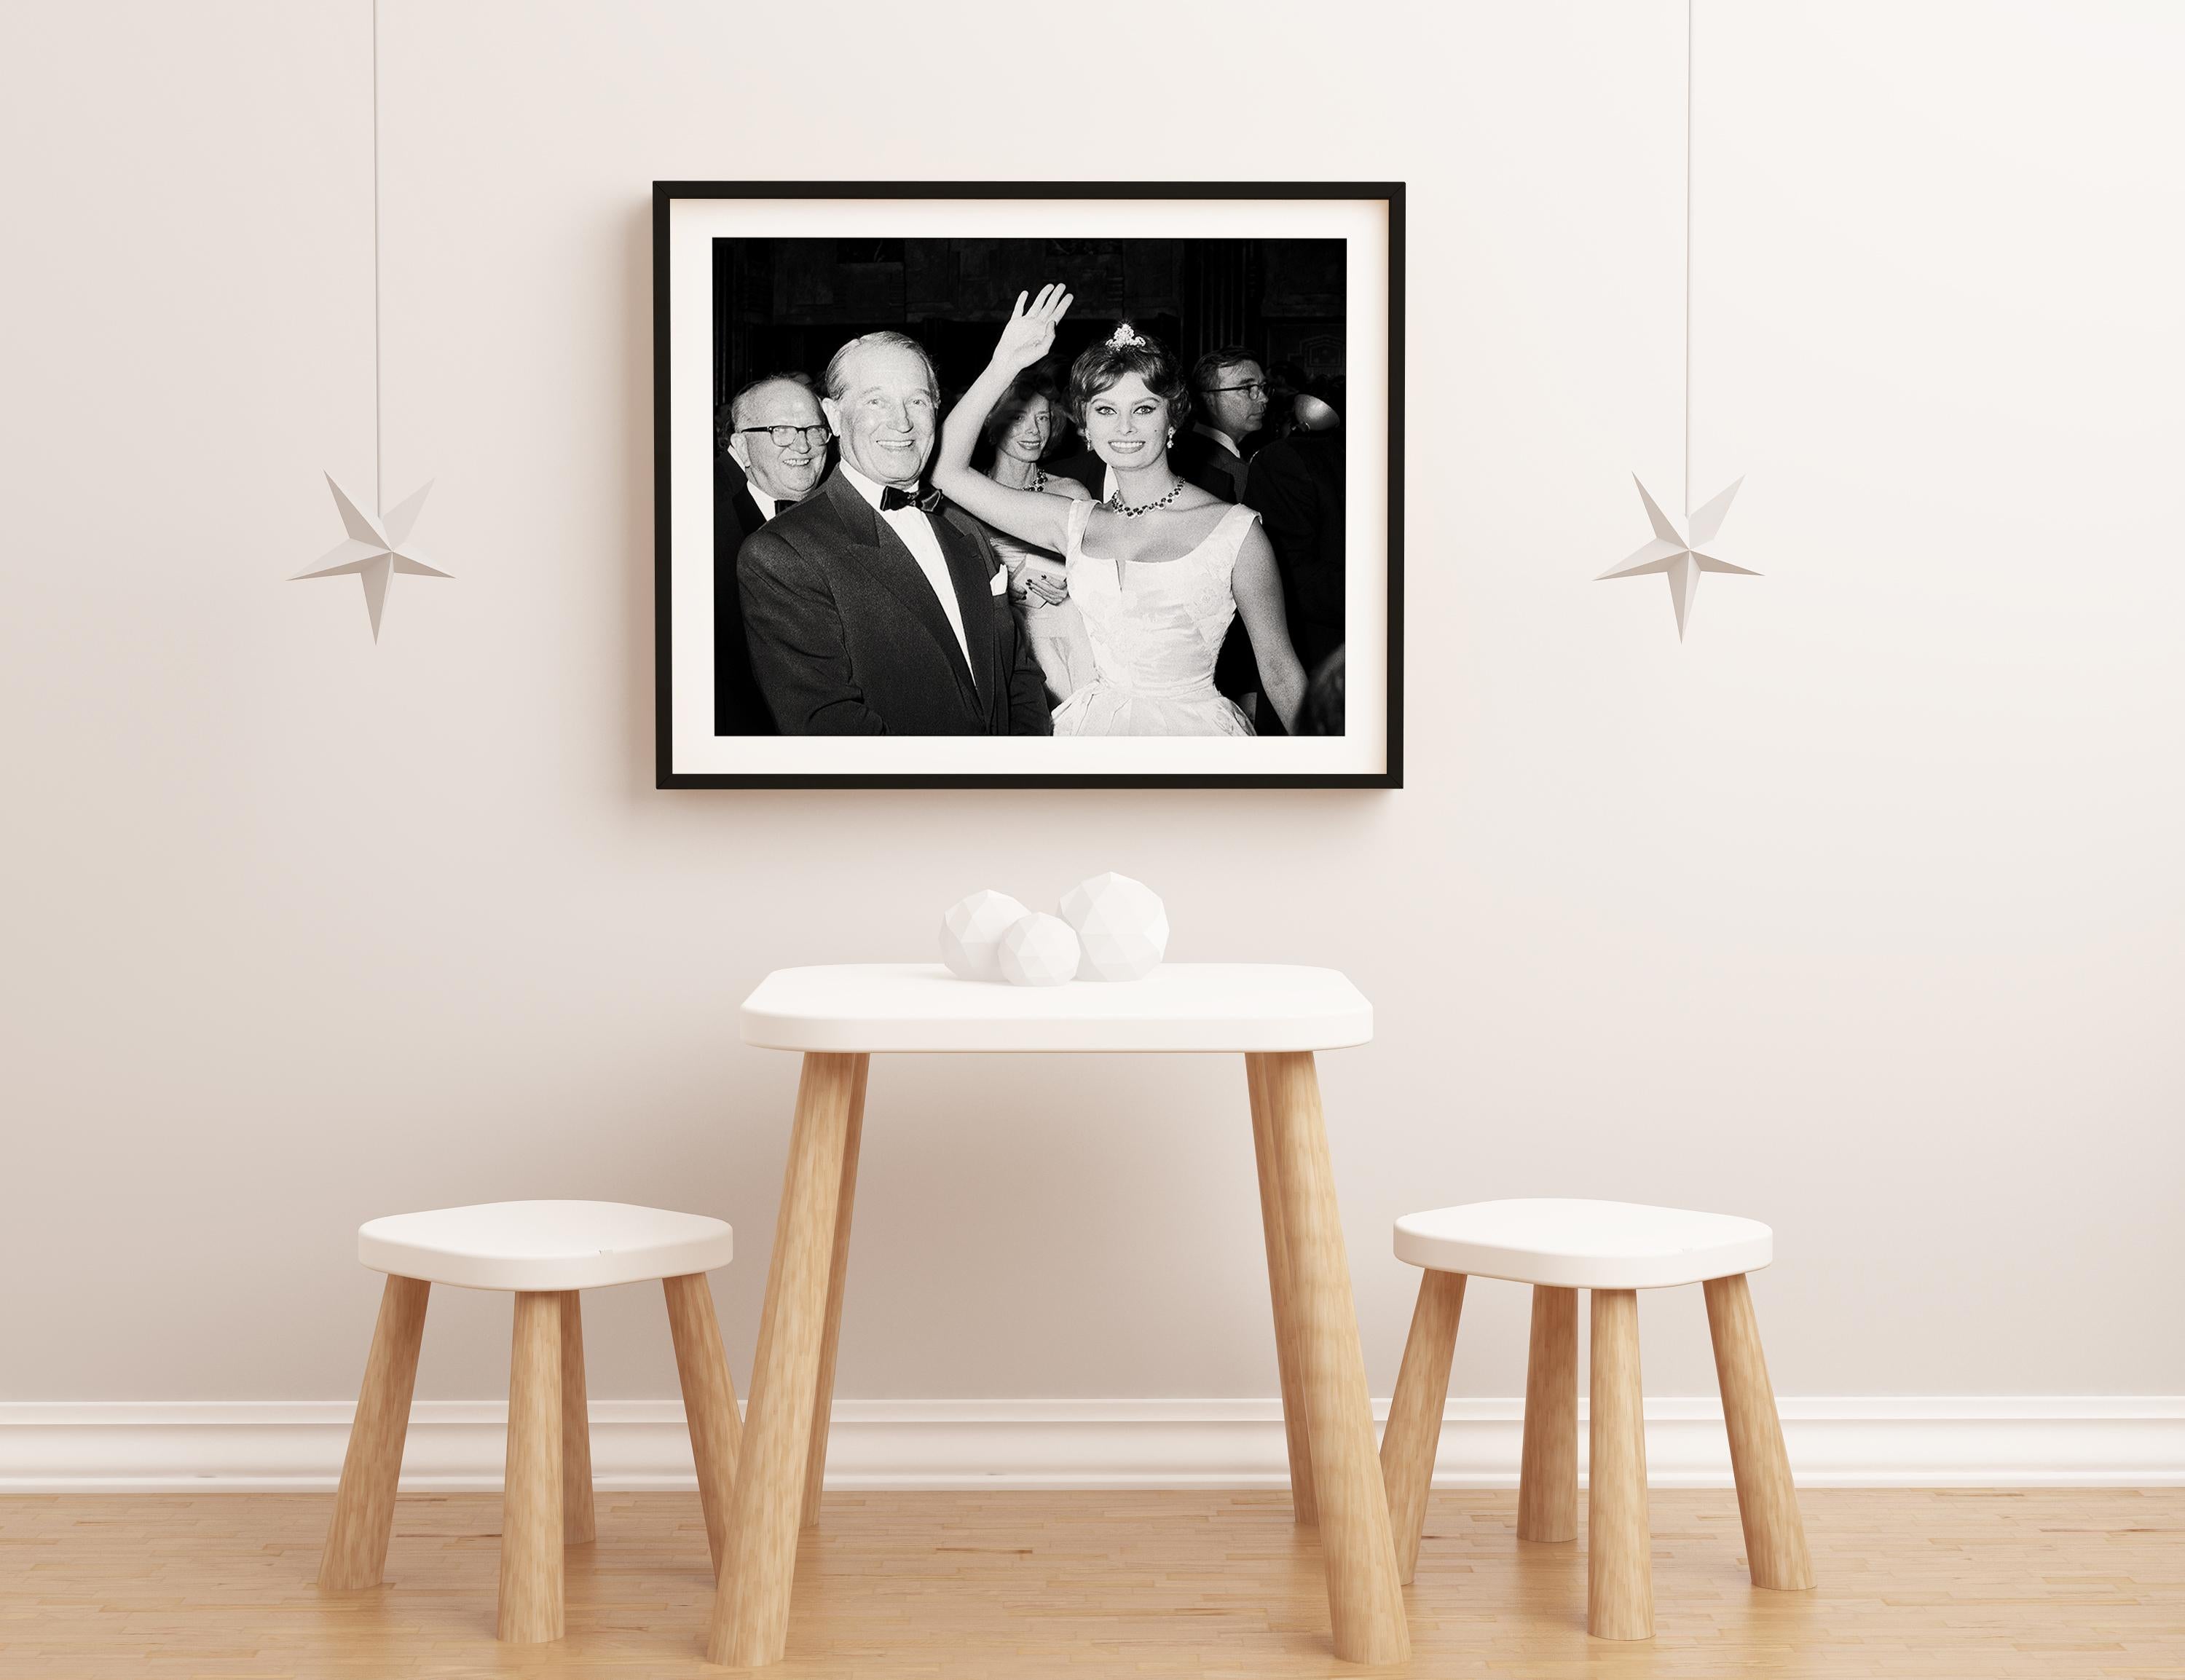 Black and white photo featuring a candid shot of Sophia Loren and Maurice Chevalier.

This image is credited to Globe Photos.

This is a limited edition fine art C-Print, hand numbered out of an edition of 125 with an accompanying certificate of